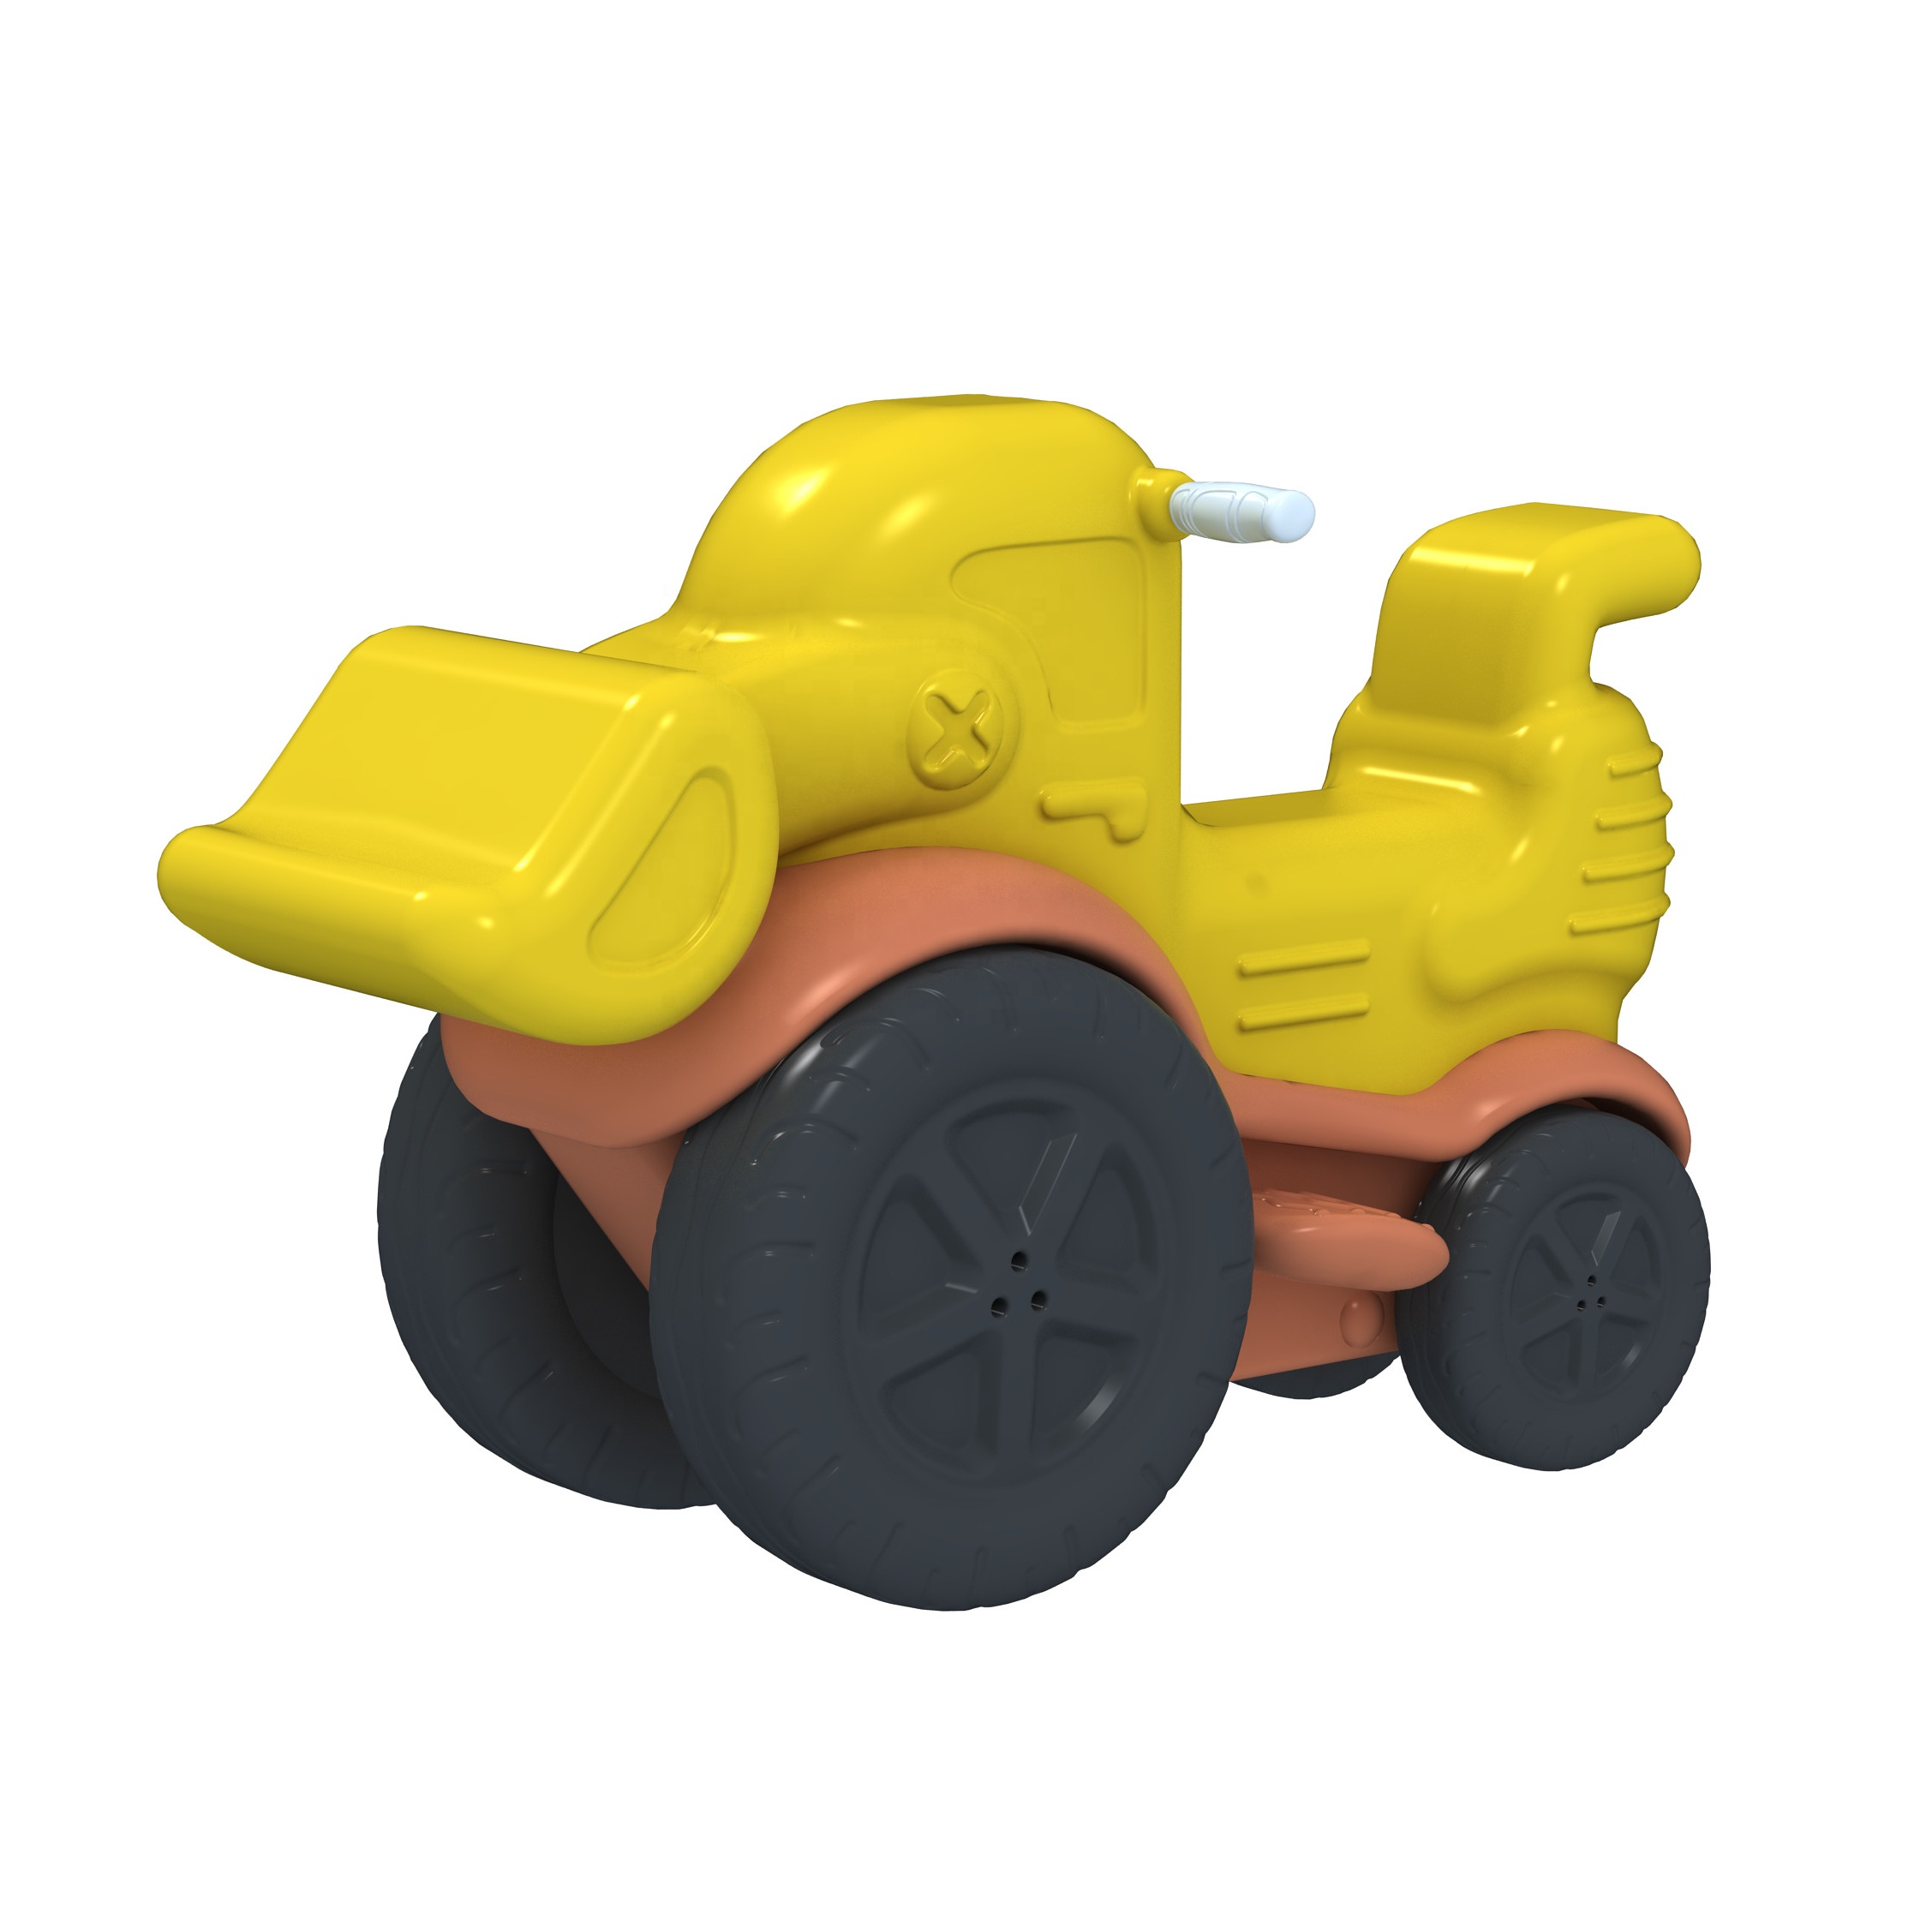 High Quality Wooden Playground Equipment Outdoor – IDO outdoor playground tank kids outdoor small yellow toy car interesting outdoor playground toy car – IDO Amusement